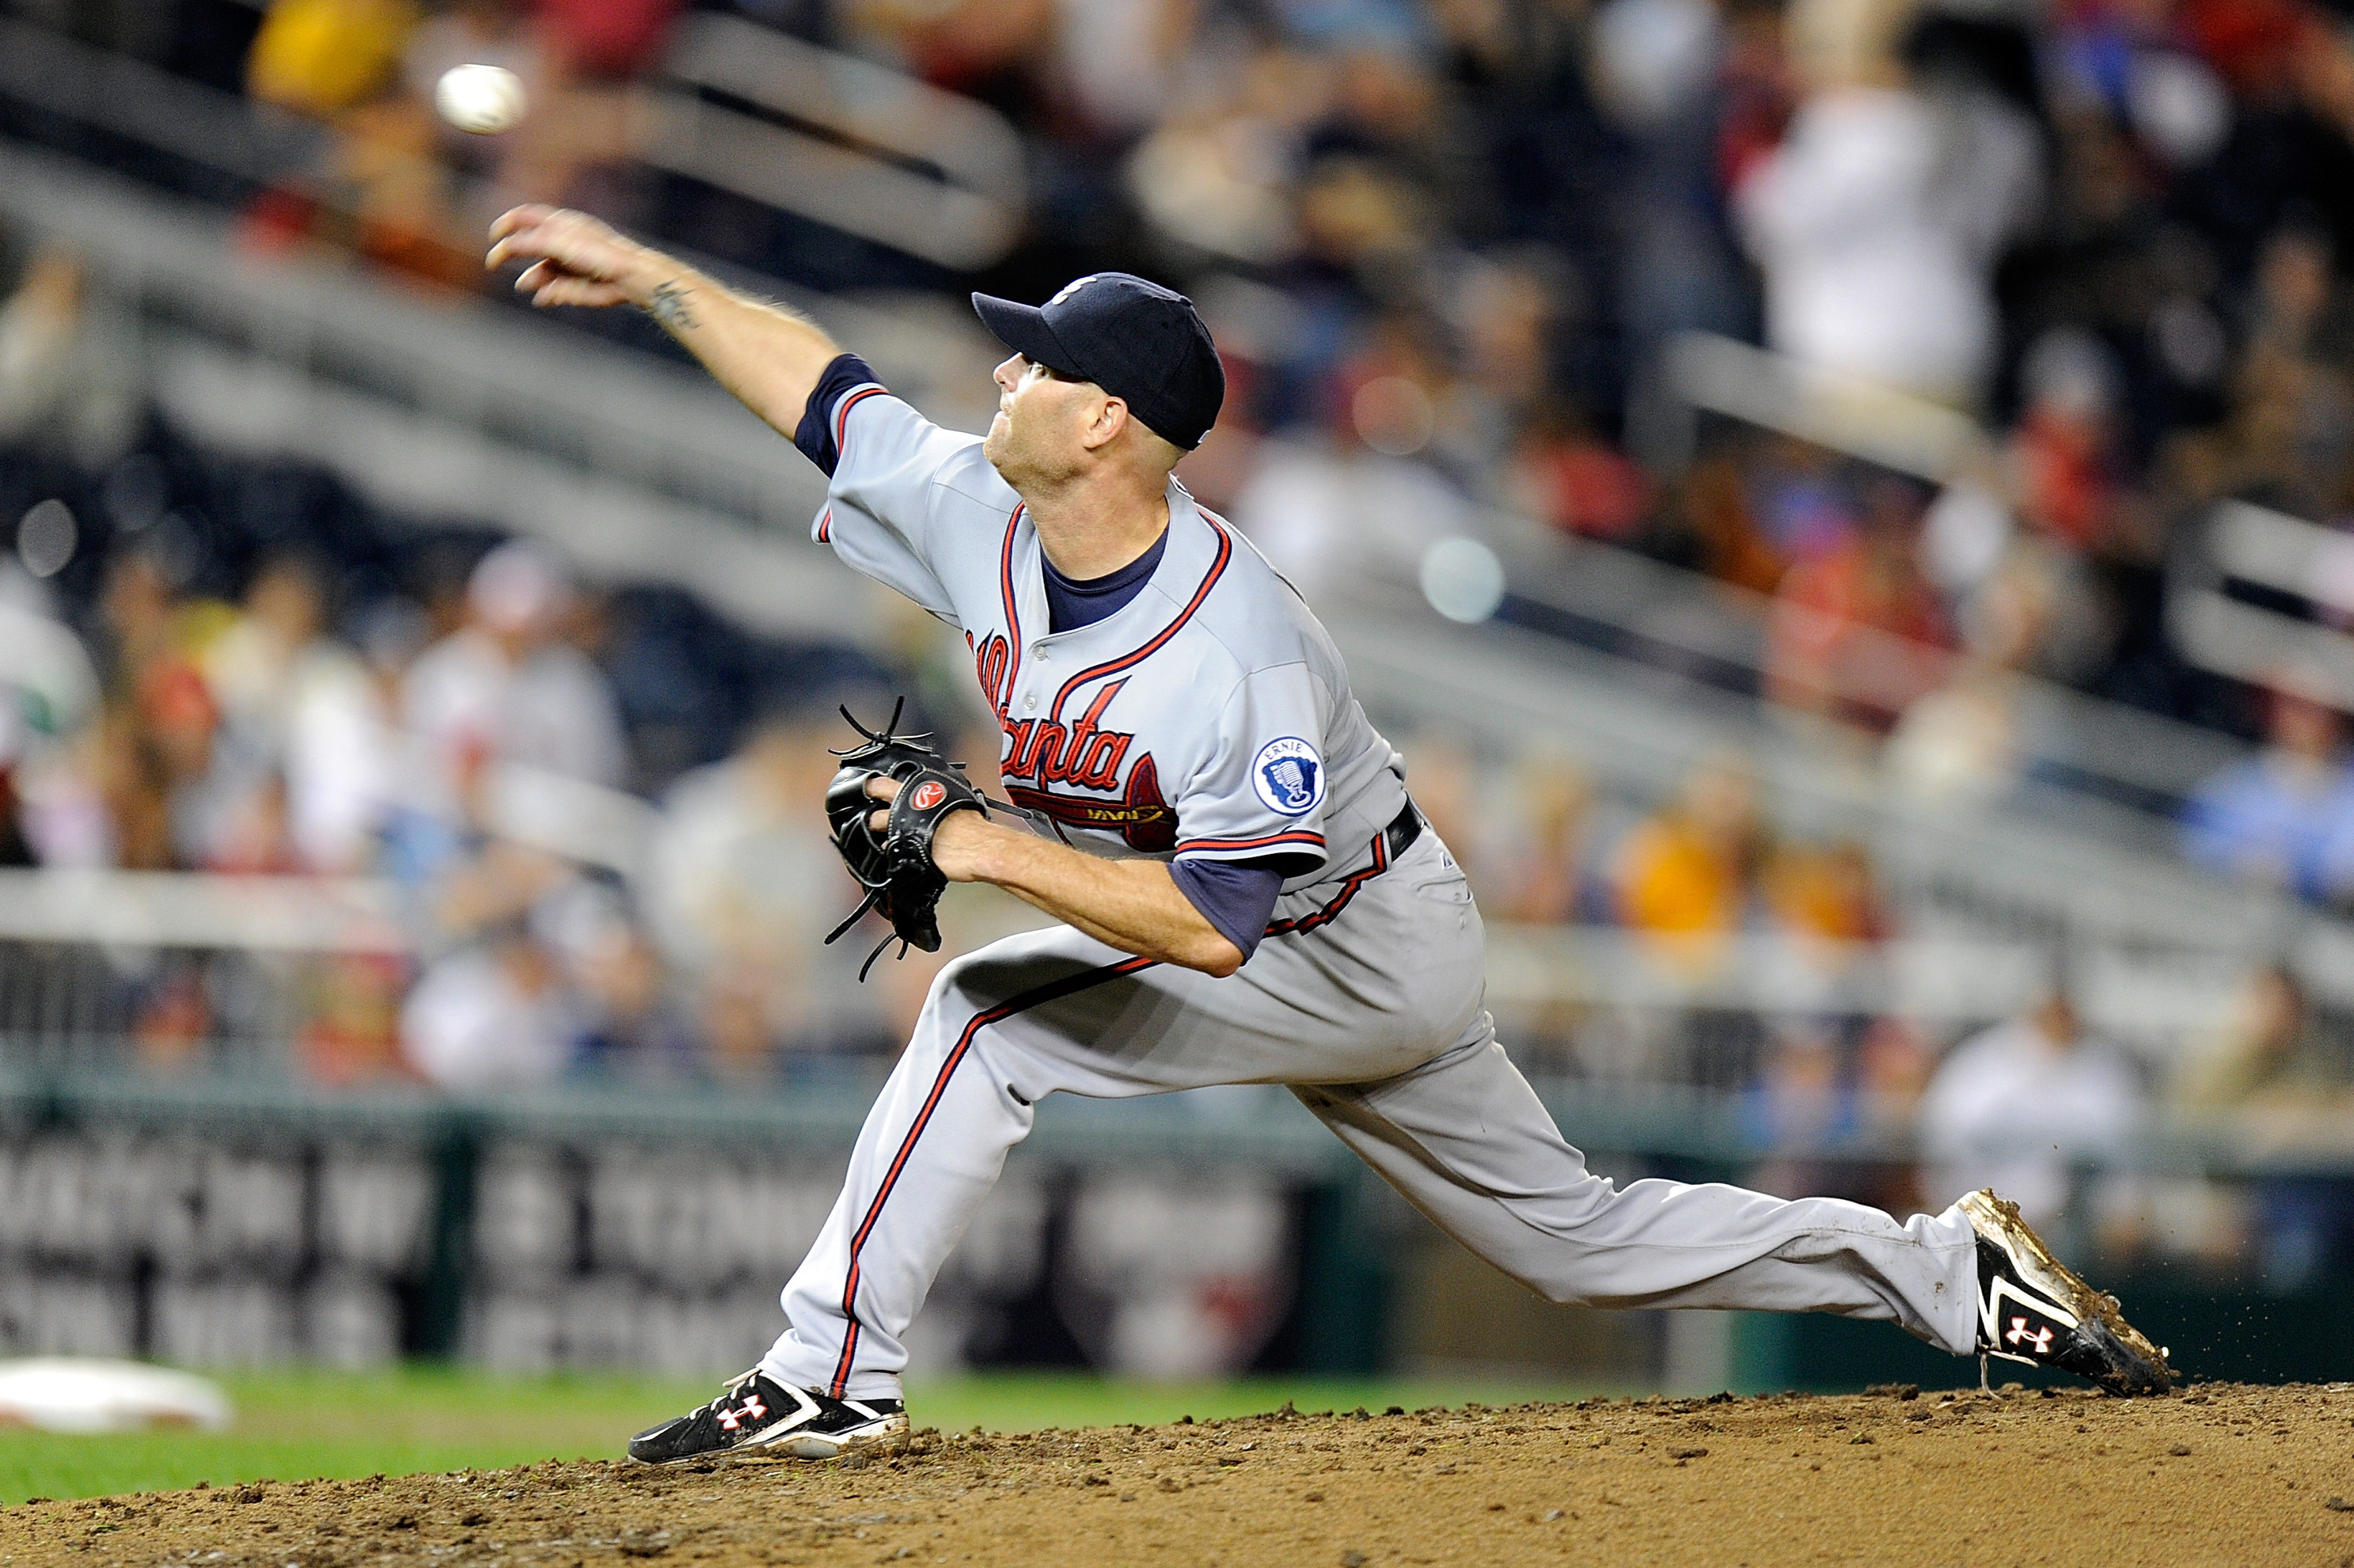 Atlanta Braves starter Tim Hudson throws a pitch during the first